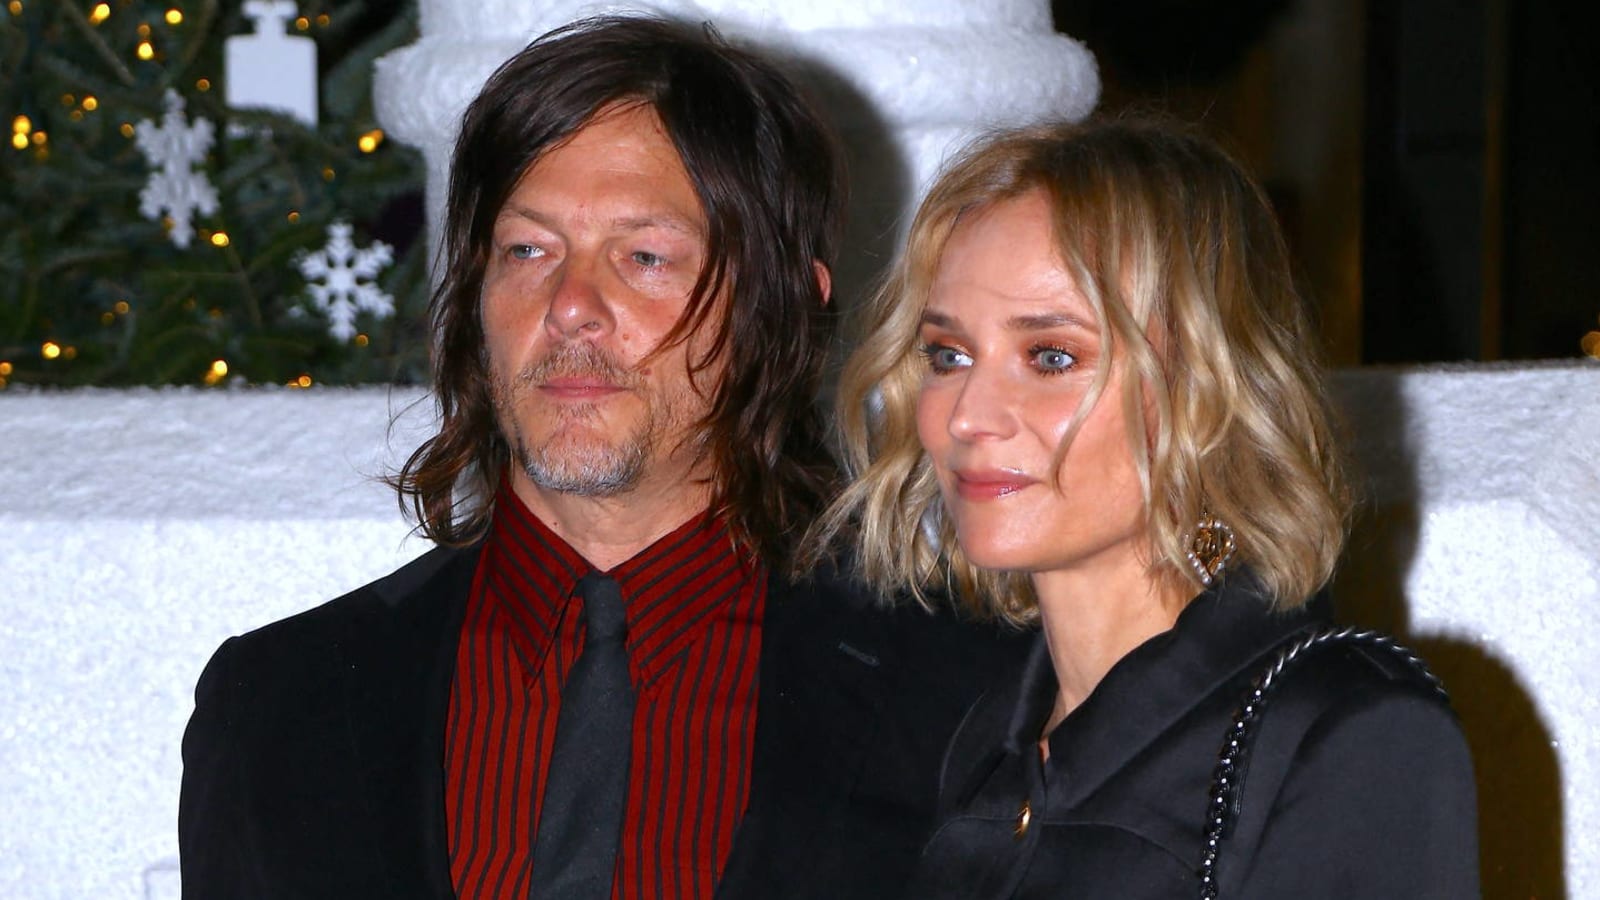 'Walking Dead' star Norman Reedus reportedly engaged to actress Diane Kruger